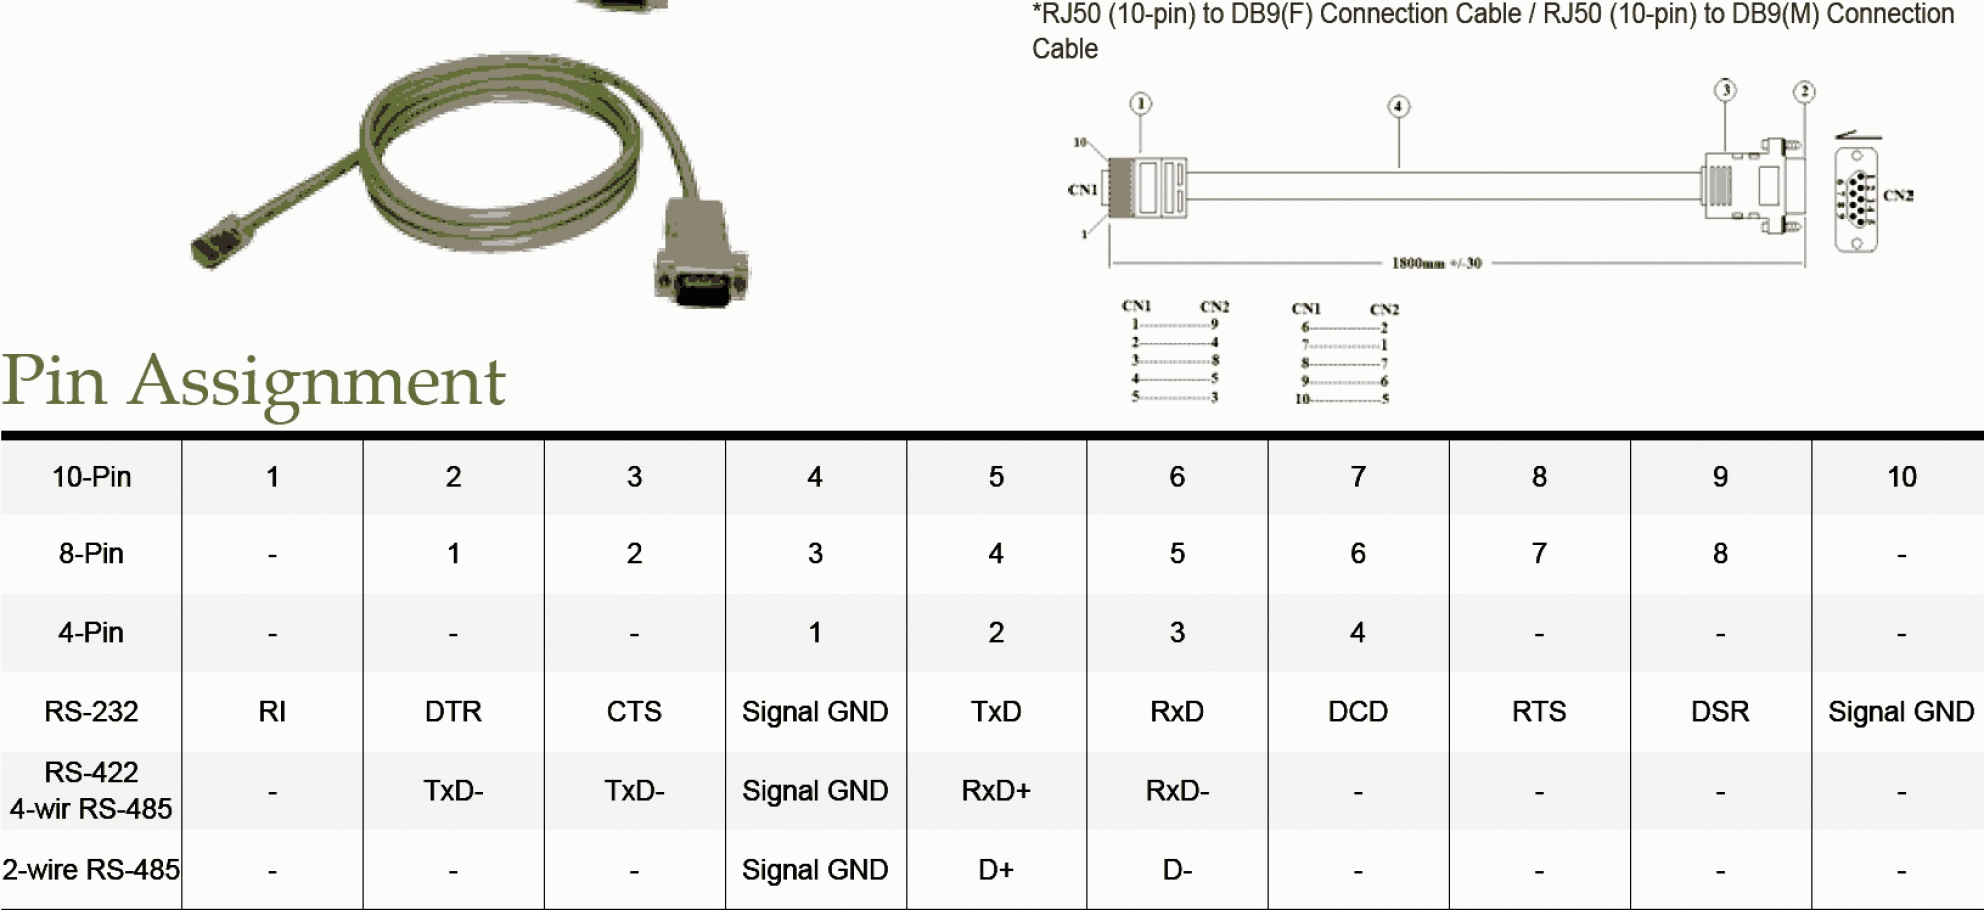 Pictures Rs485 2 Wire Connection Diagram 4 Wiring Todays - Rs 485 Wiring Diagram